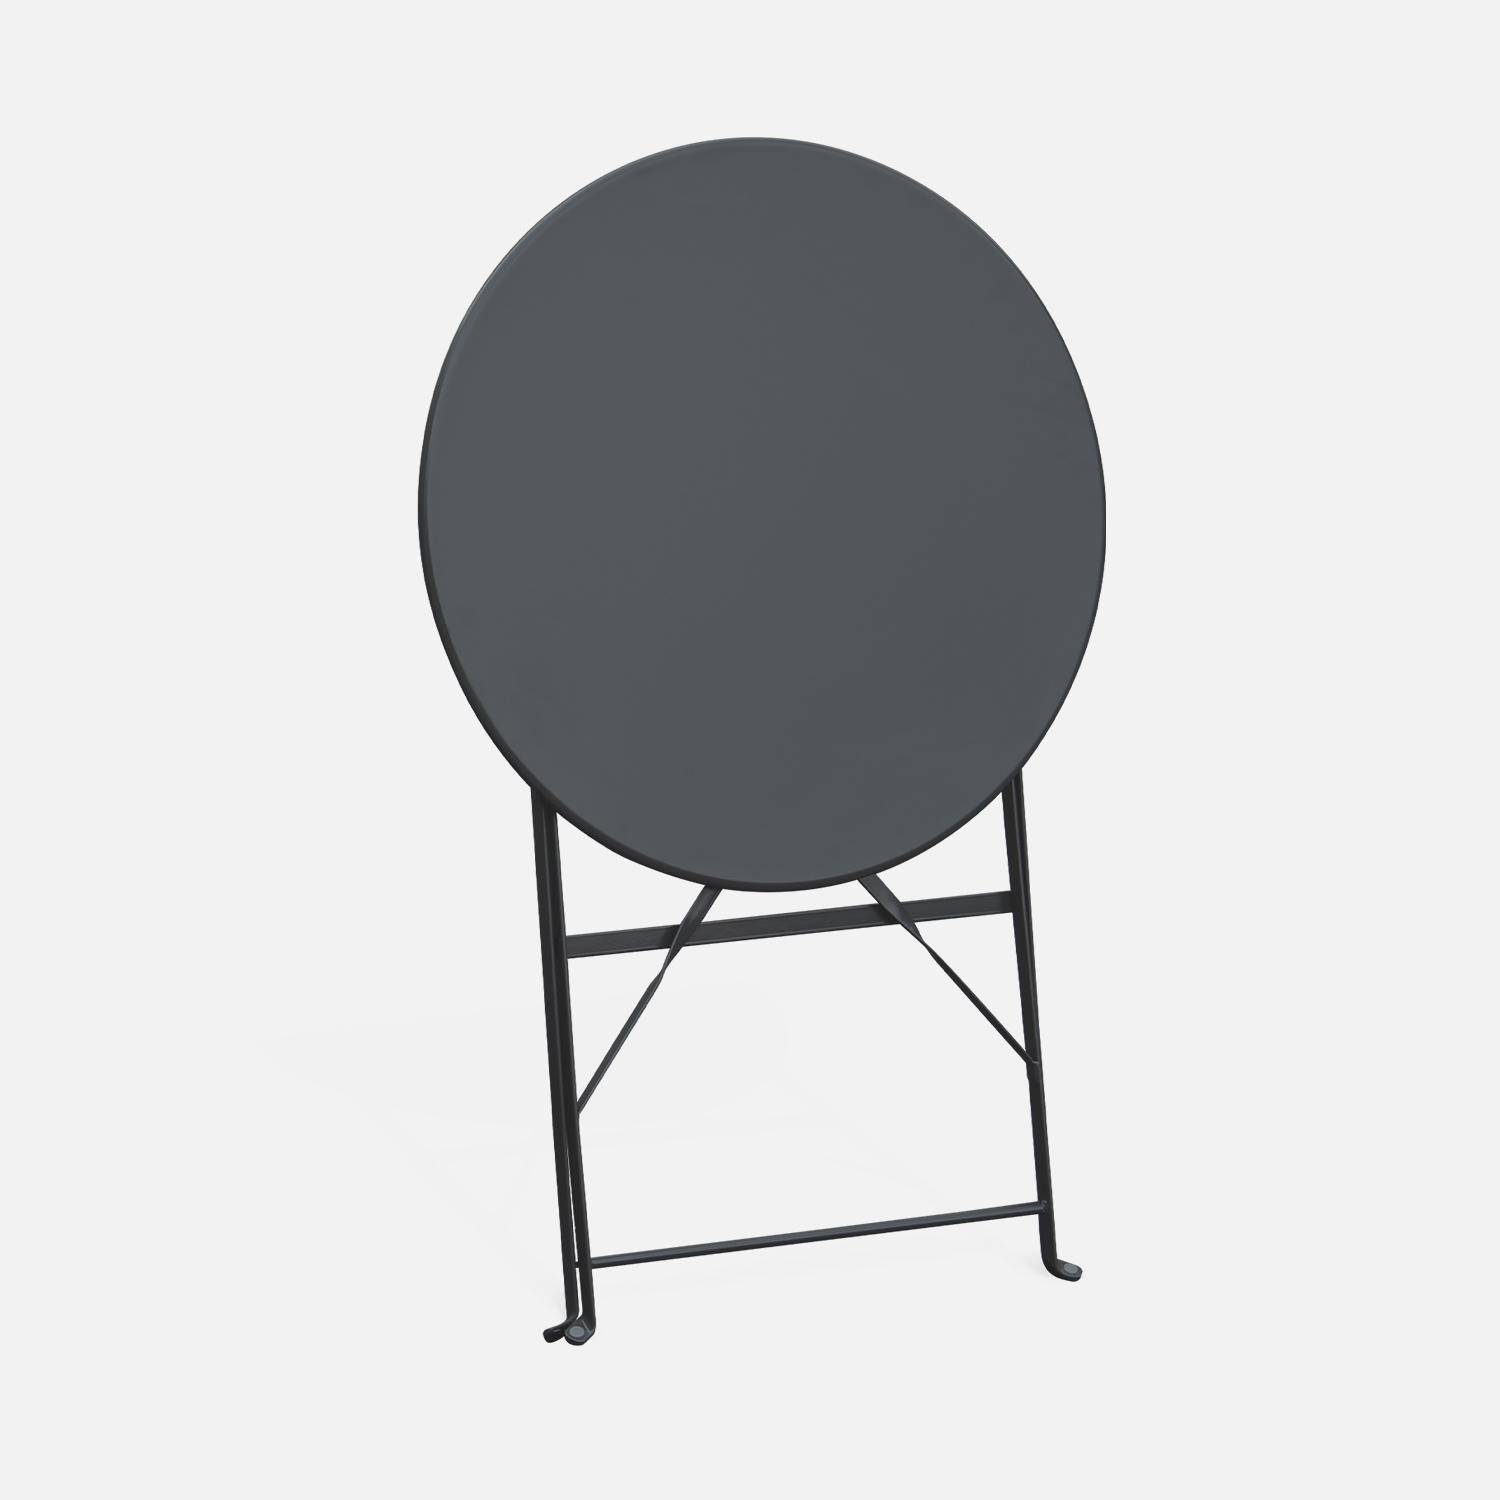 Foldable bistro garden table - Round Emilia anthracite- Round table Ø60cm, thermo-lacquered steel Photo5